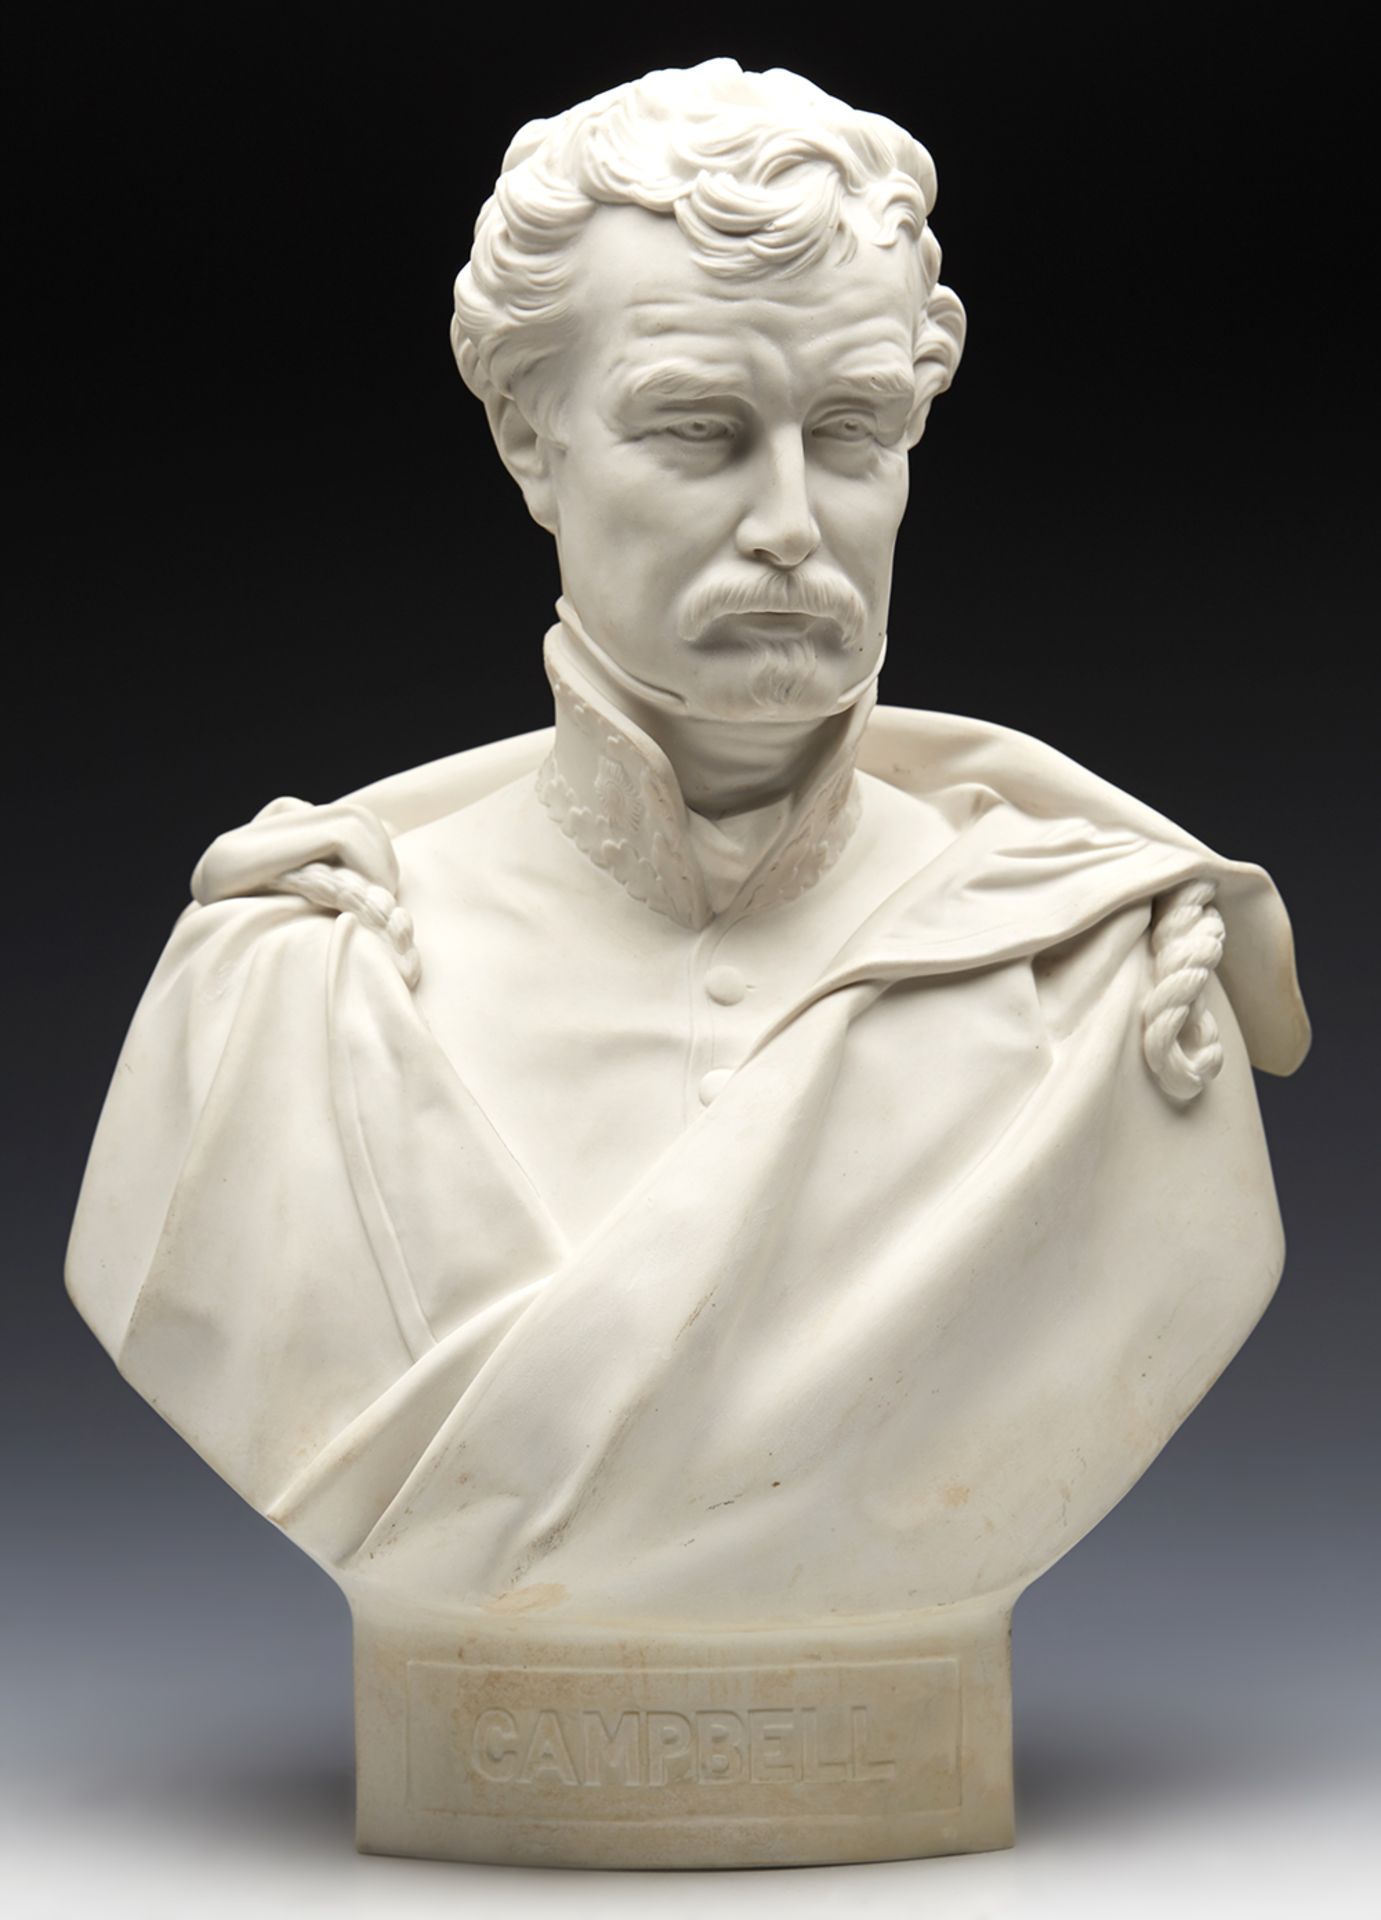 ANTIQUE RIDGWAY PARIAN BUST OF SIR COLIN CAMPBELL BY J DURHAM 1858